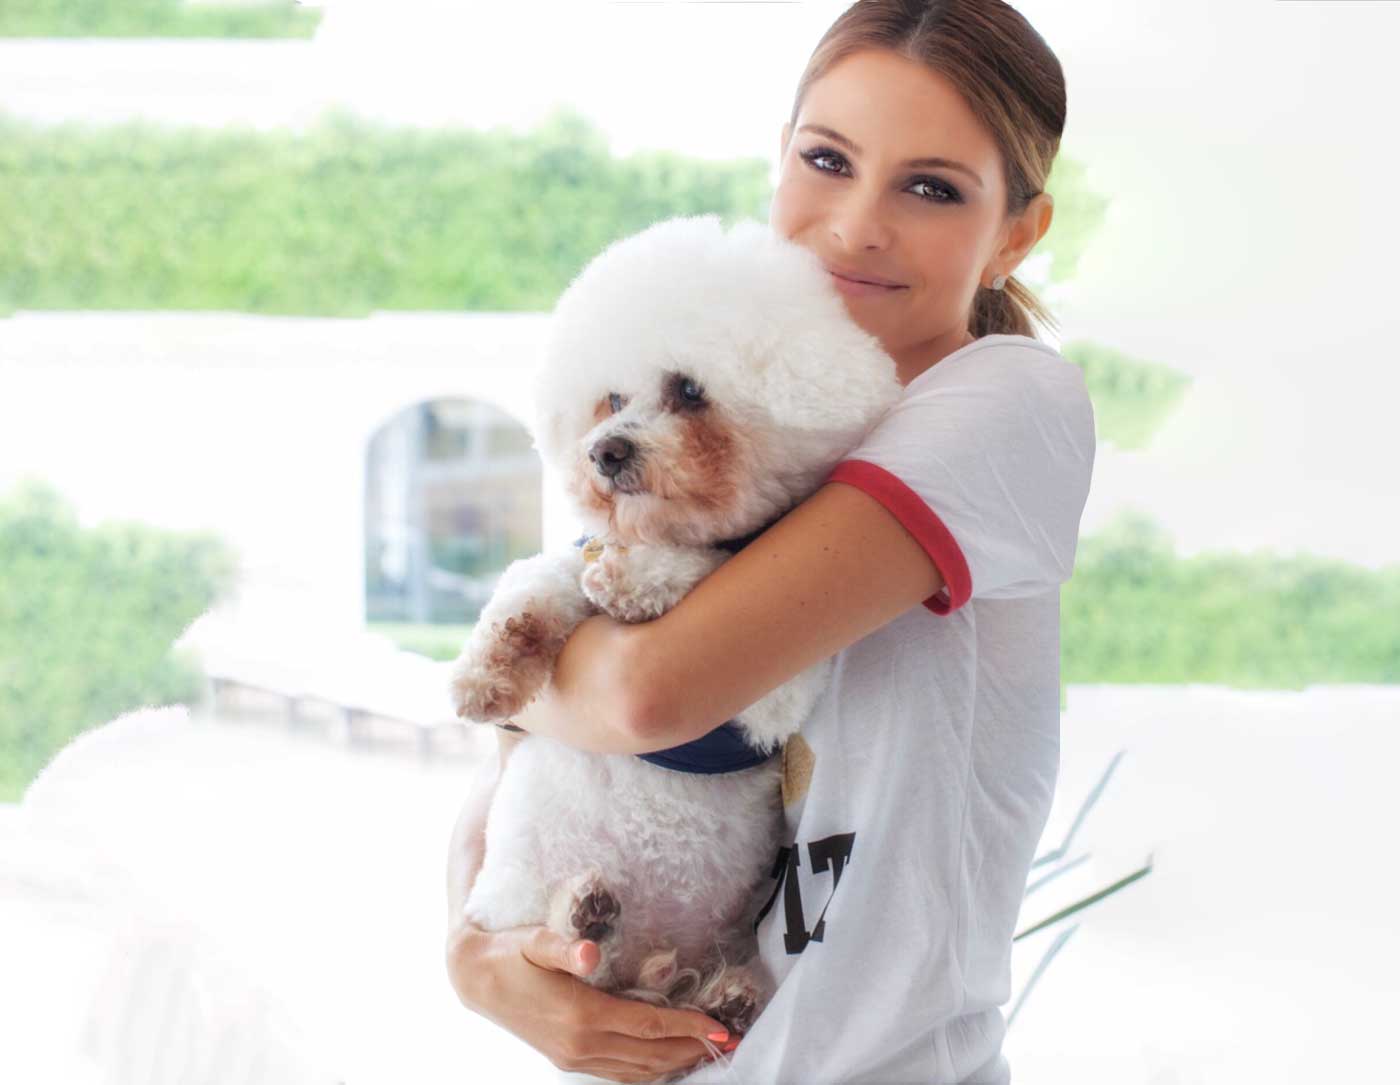 “Whinnie and my pets have done so much for me. Having them by my side each and every day has made my life better, and I am truly grateful for each of them,” said Maria Menounos, Emmy Award-winning journalist and host of leading Apple Podcast “Conversations with Maria.”